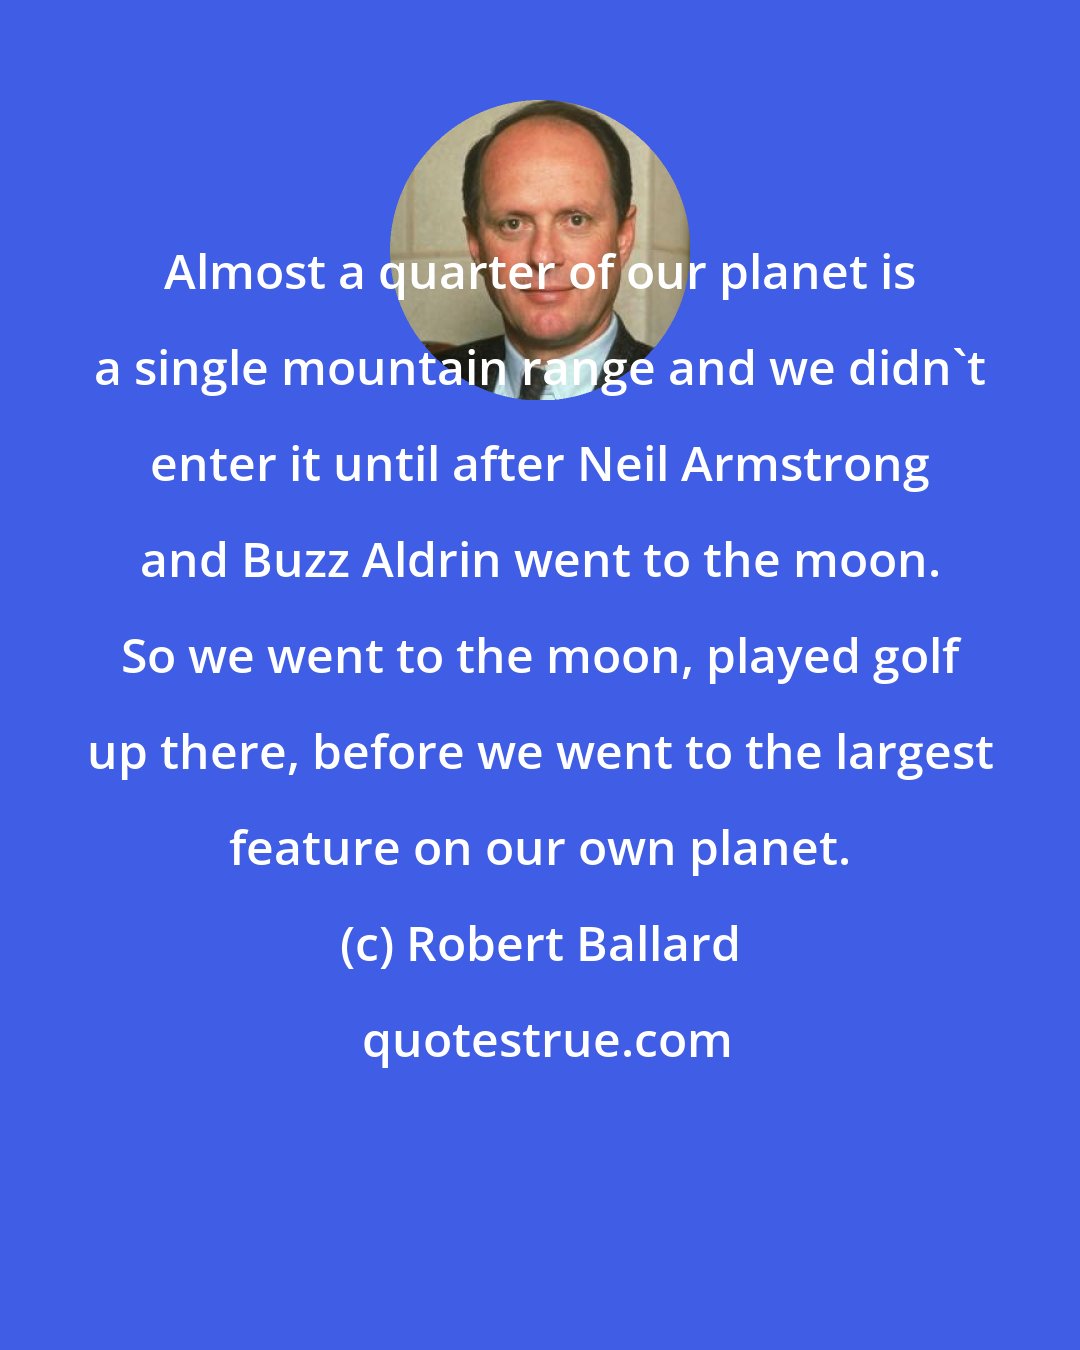 Robert Ballard: Almost a quarter of our planet is a single mountain range and we didn't enter it until after Neil Armstrong and Buzz Aldrin went to the moon. So we went to the moon, played golf up there, before we went to the largest feature on our own planet.